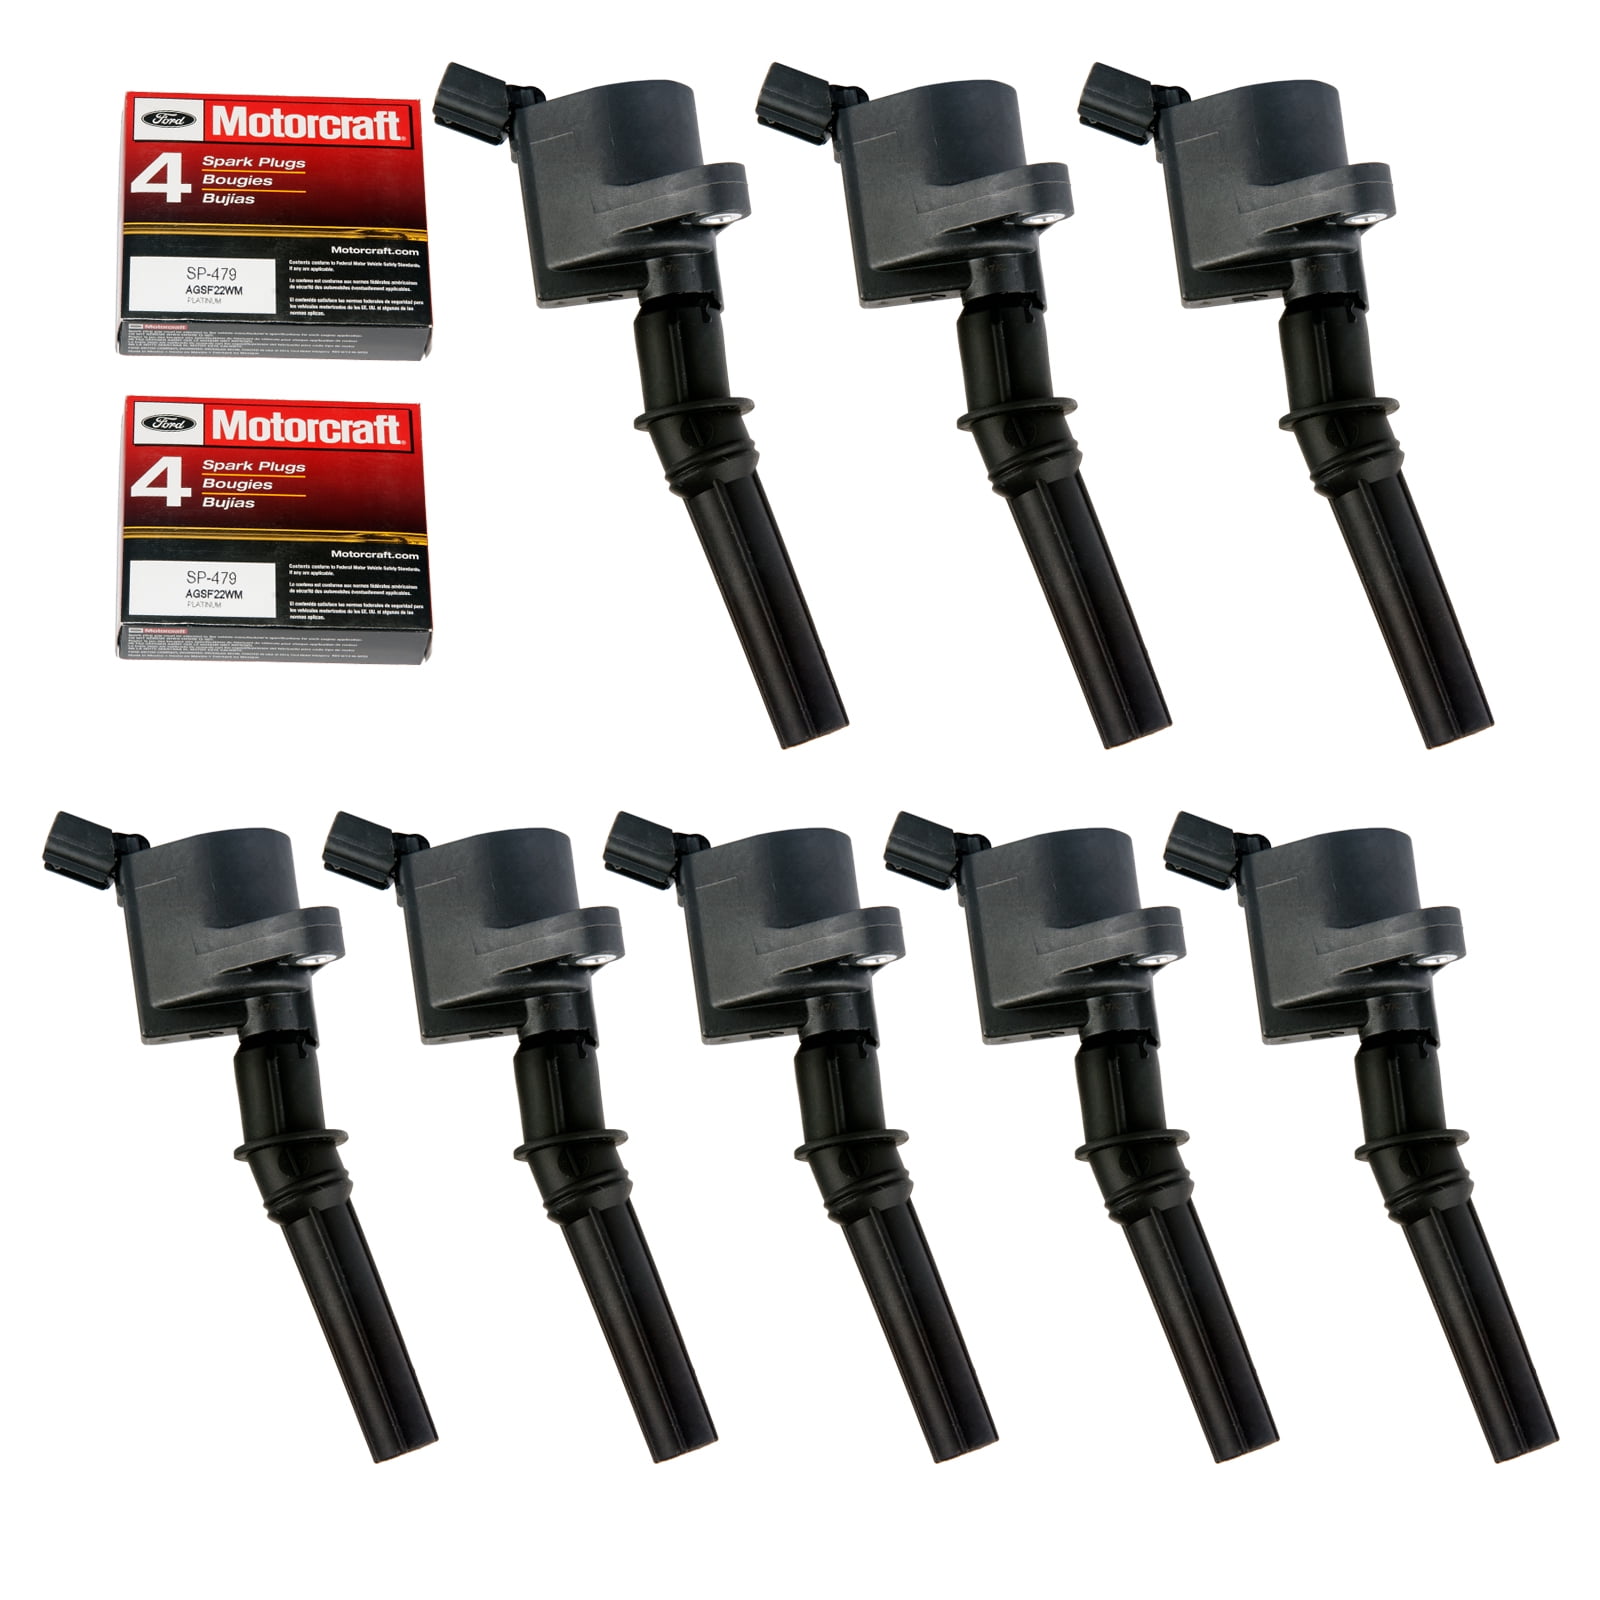 Complete ignition coils for Ford Lincoln Mercury DG508 SET OF 8 4.6L 5.4L V8 New 